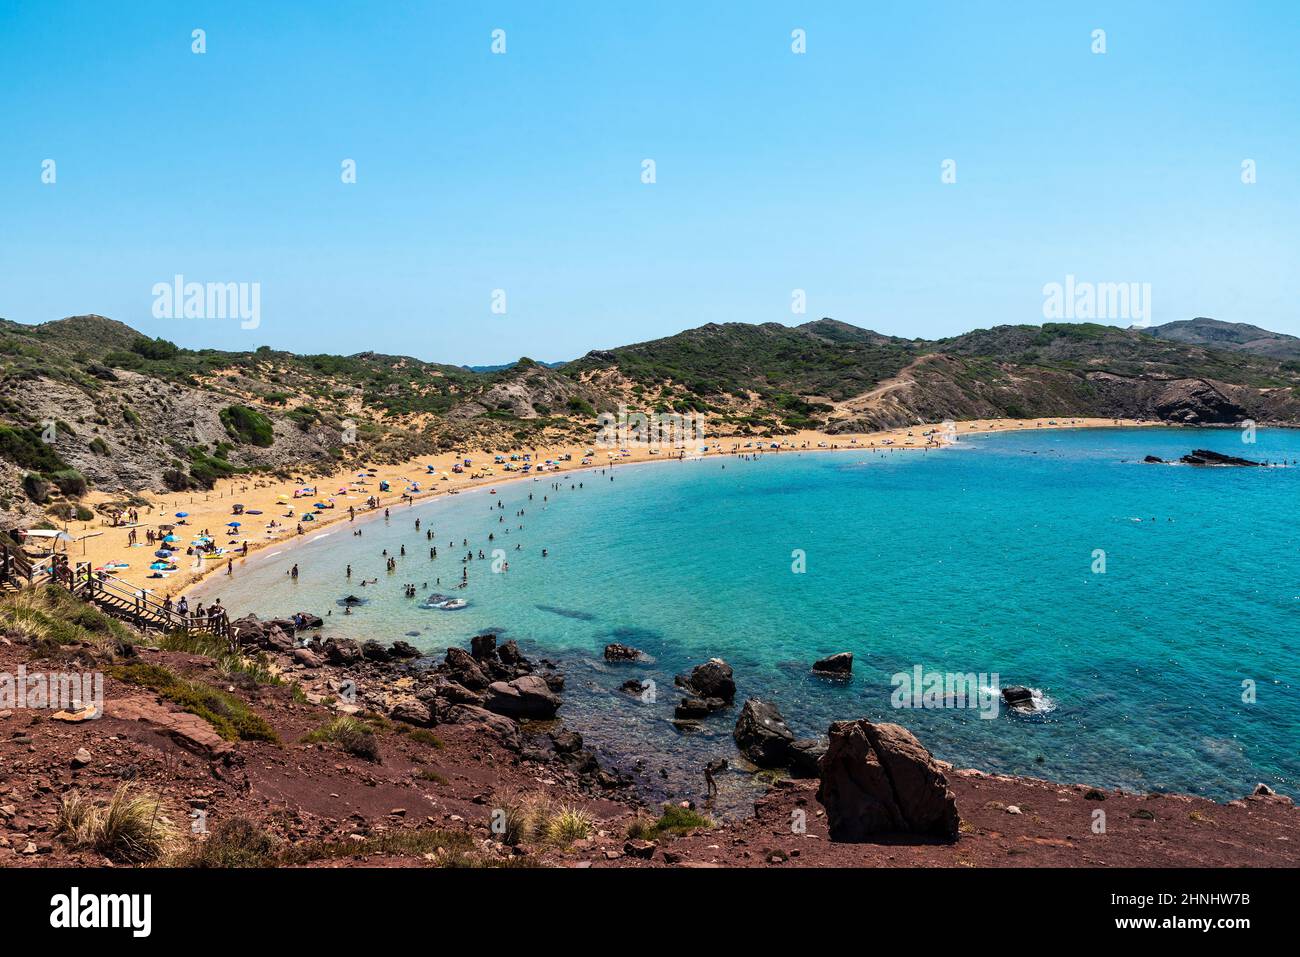 Overview of the Cavalleria beach with people around in Menorca, Balearic island, Spain Stock Photo